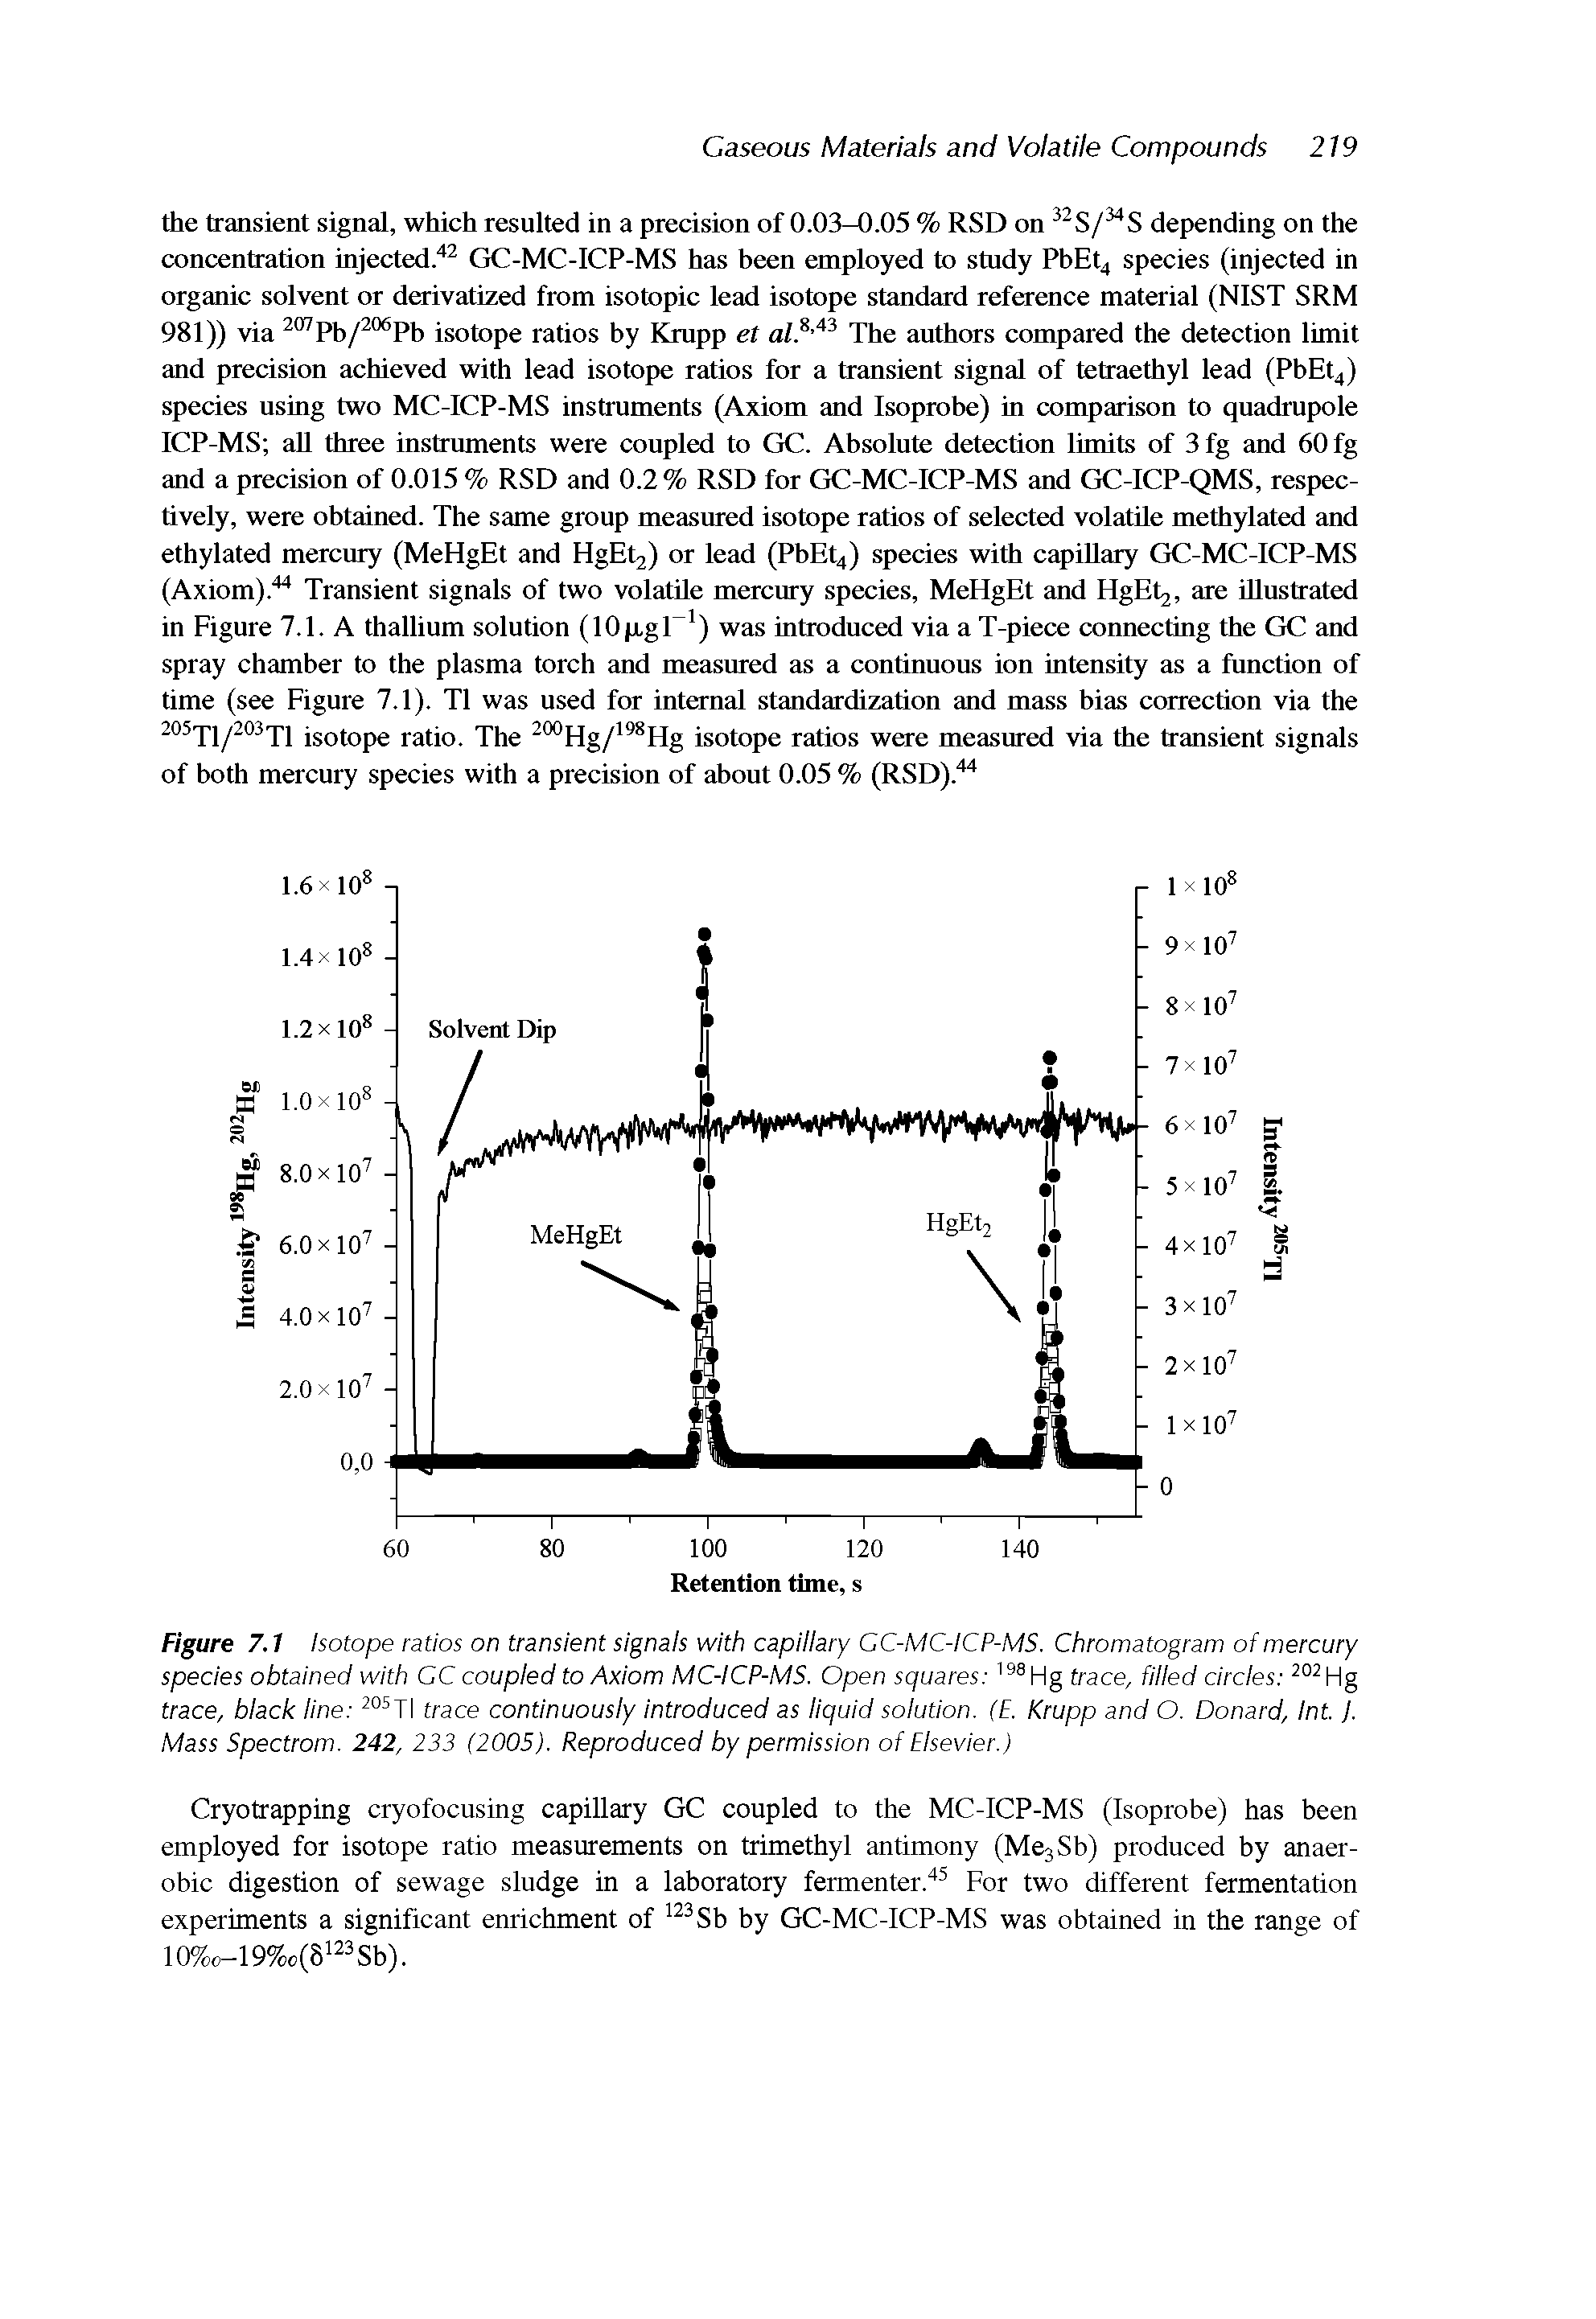 Figure 7.1 Isotope ratios on transient signals with capillary CC-MC-ICP-MS. Chromatogram of mercury species obtained with CC coupled to Axiom MC-ICP-MS. Open squares 198Hg trace, filled circles 202Hg trace, black line 205TI trace continuously introduced as liquid solution. (E. Krupp and O. Donard, Int. j. Mass Spectrom. 242, 233 (2005). Reproduced by permission of Elsevier.)...